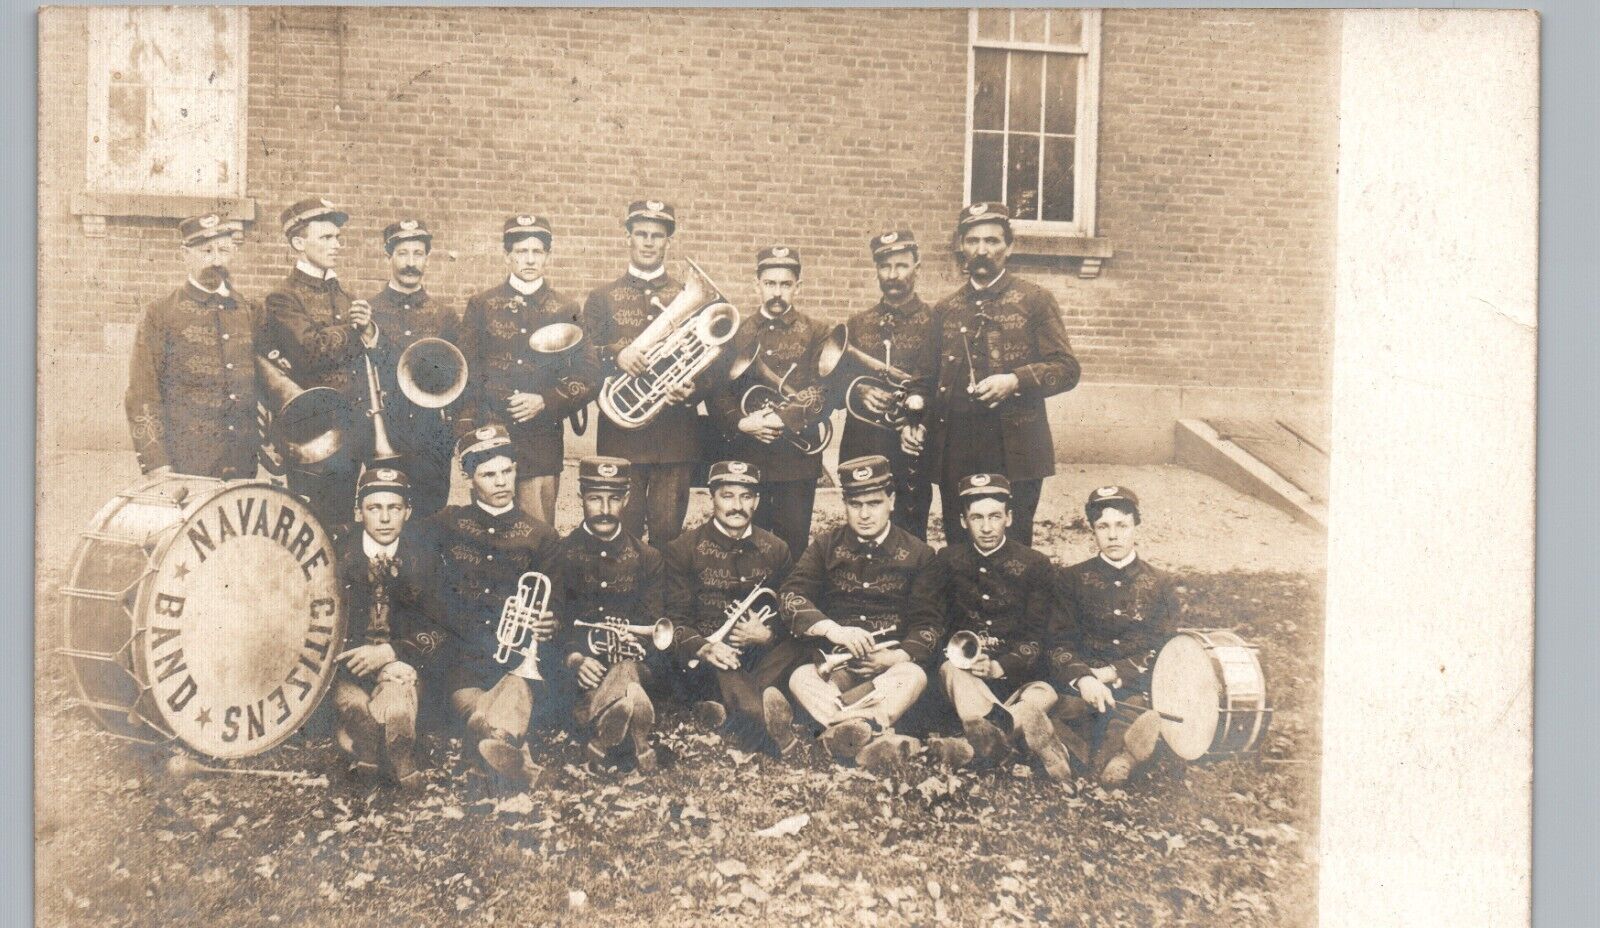 CITIZENS MARCHING BAND navarre oh real photo postcard rppc ohio parade music